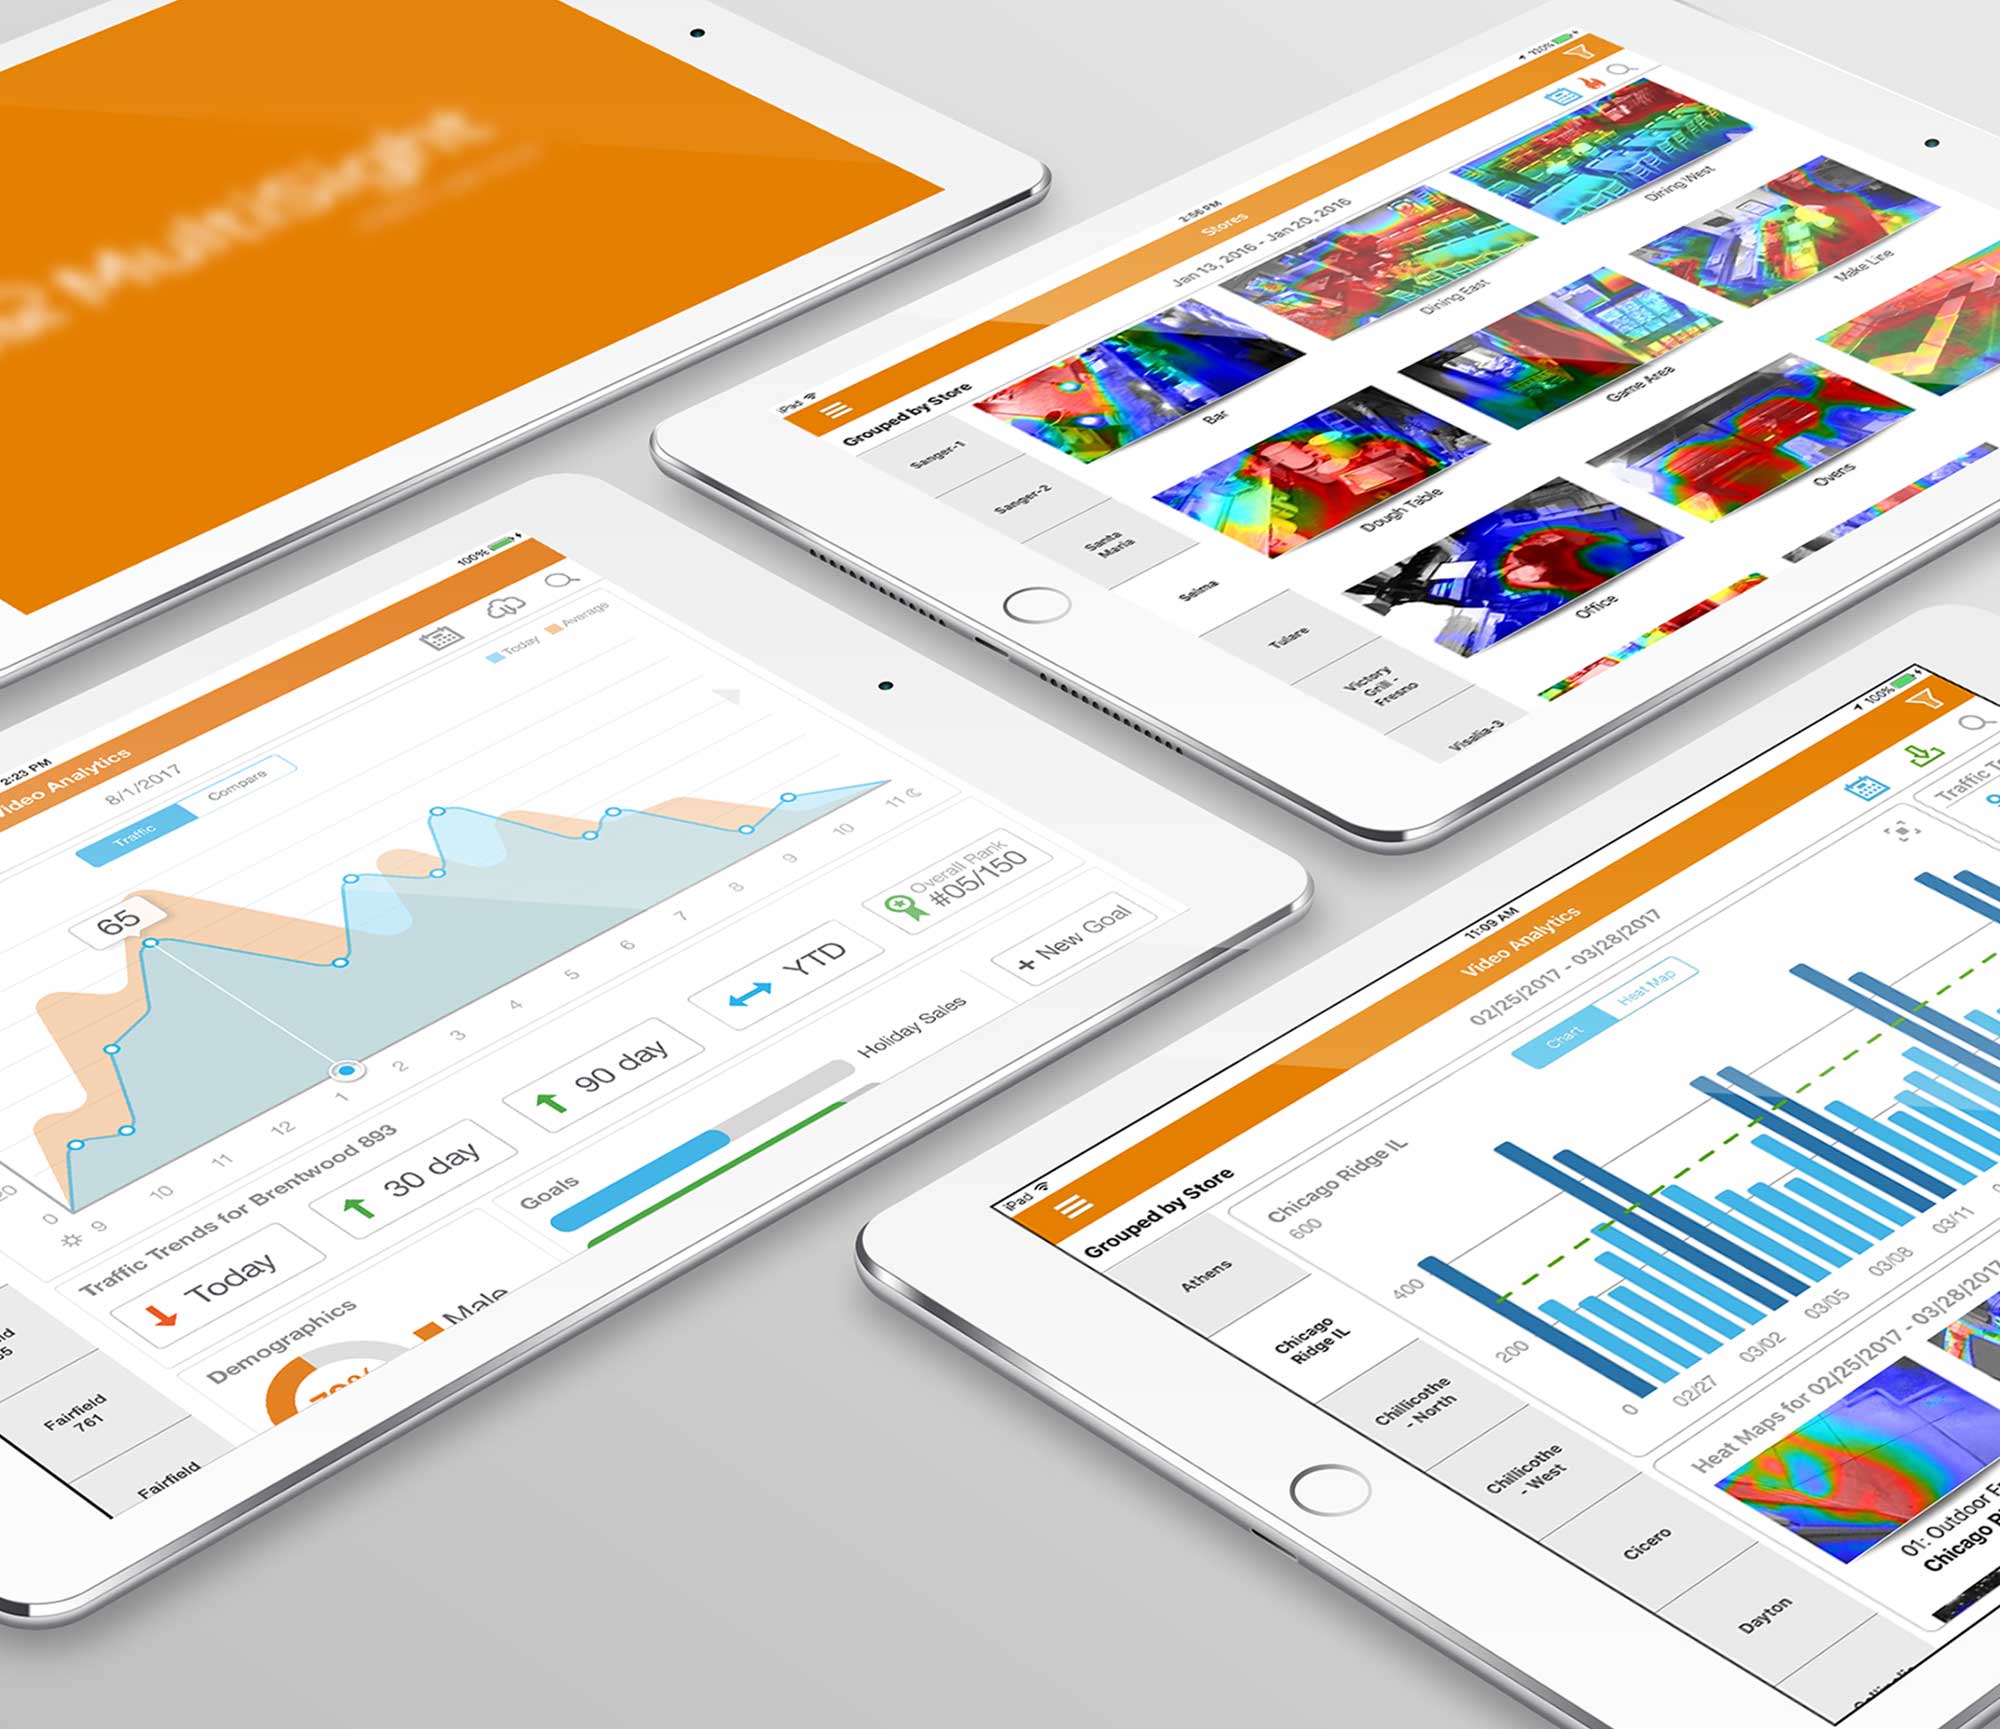 Image of data dashboards on iPads